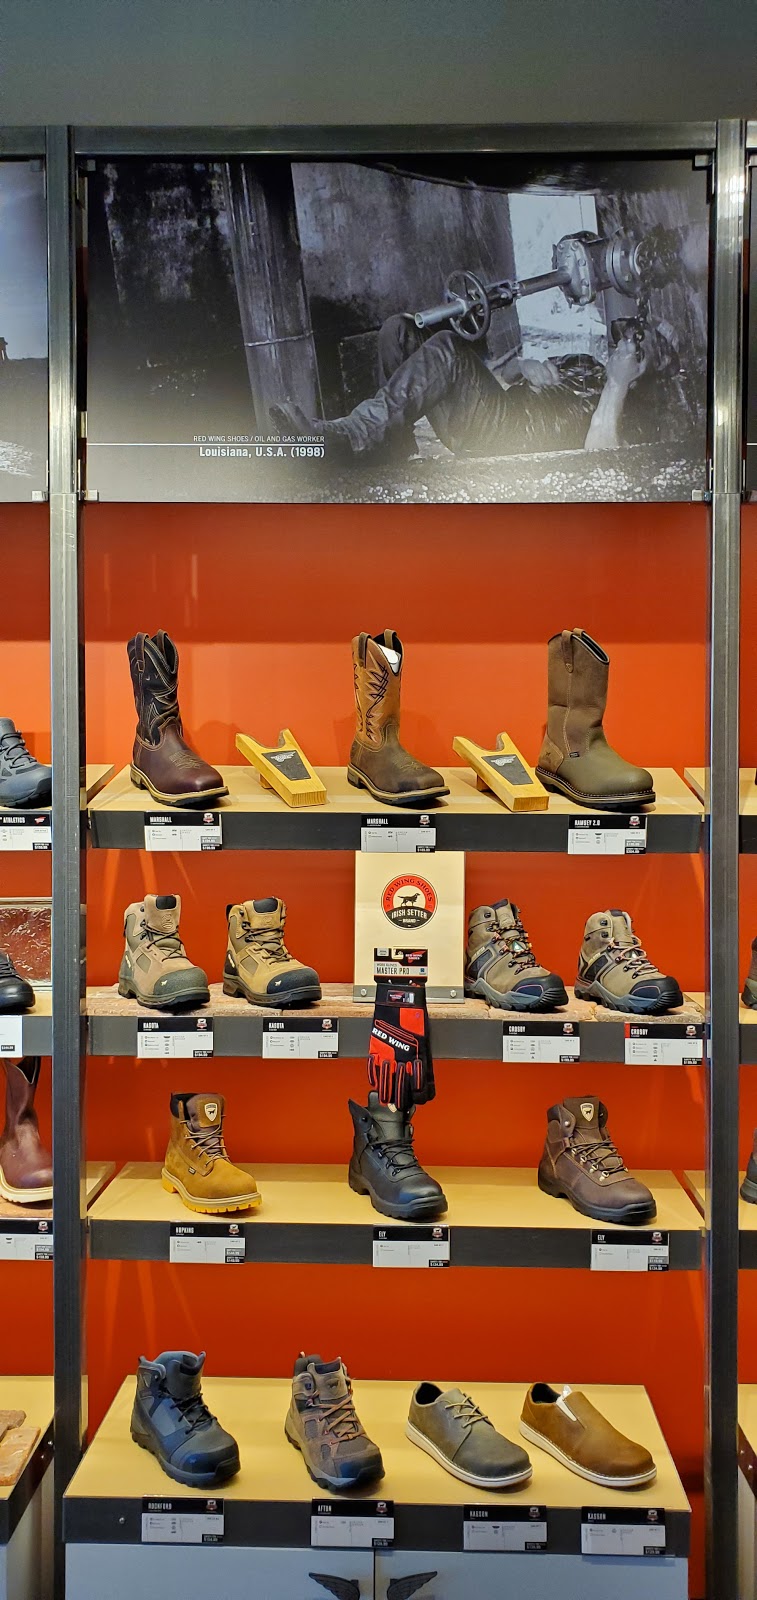 Red Wing Shoes | 14155 W Bell Rd #105, Surprise, AZ 85374 | Phone: (623) 215-7435